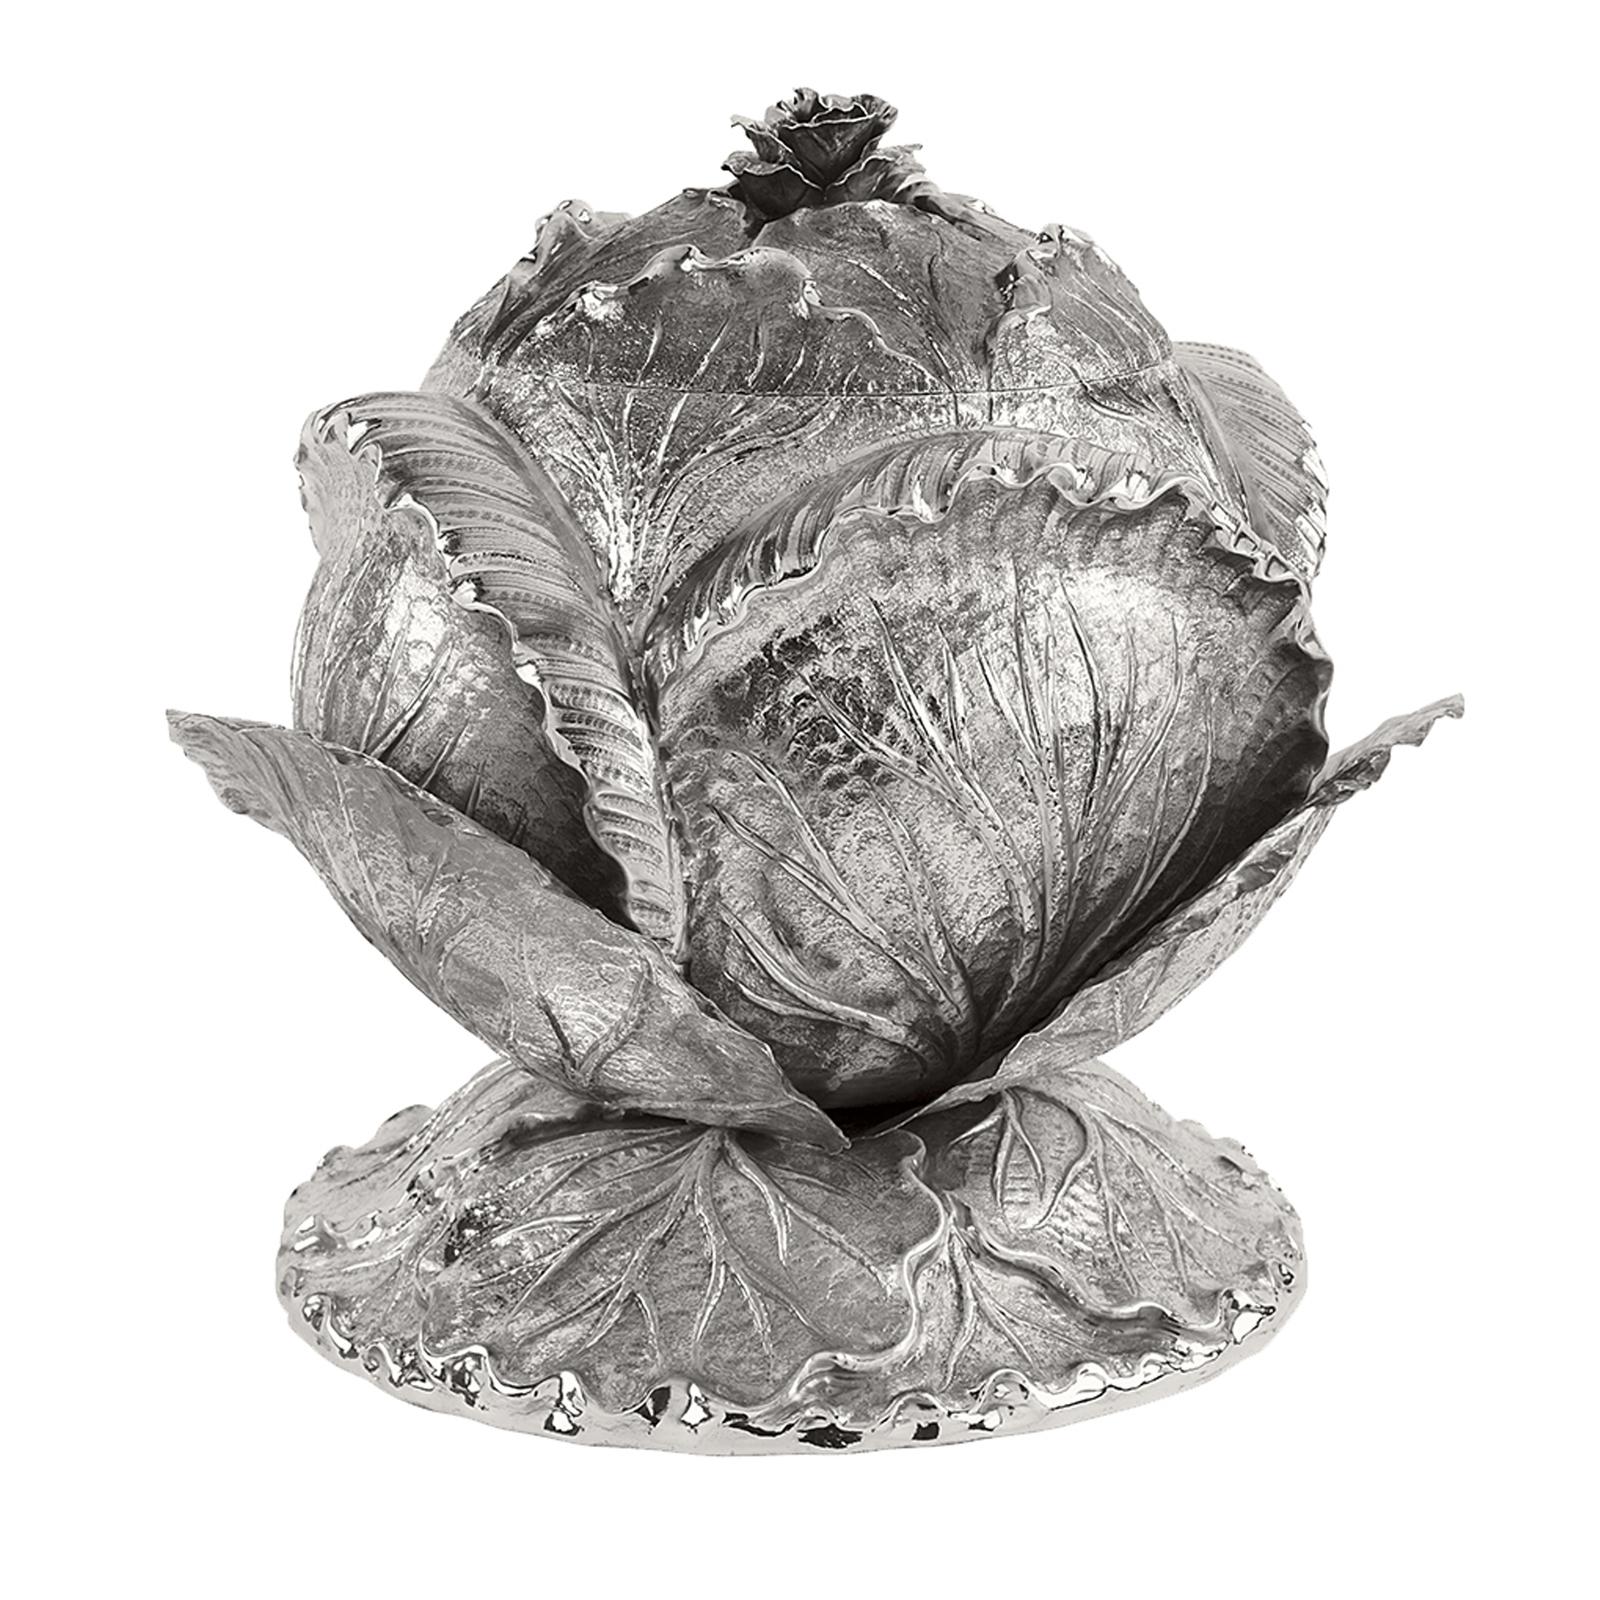 This sumptuous soup terrine is made entirely in silver in the shape of a cabbage, rendered in all its vivid detail. Masterful craftsmanship and a Classic style make this piece a timeless object of functional decor that will instantly enrich any